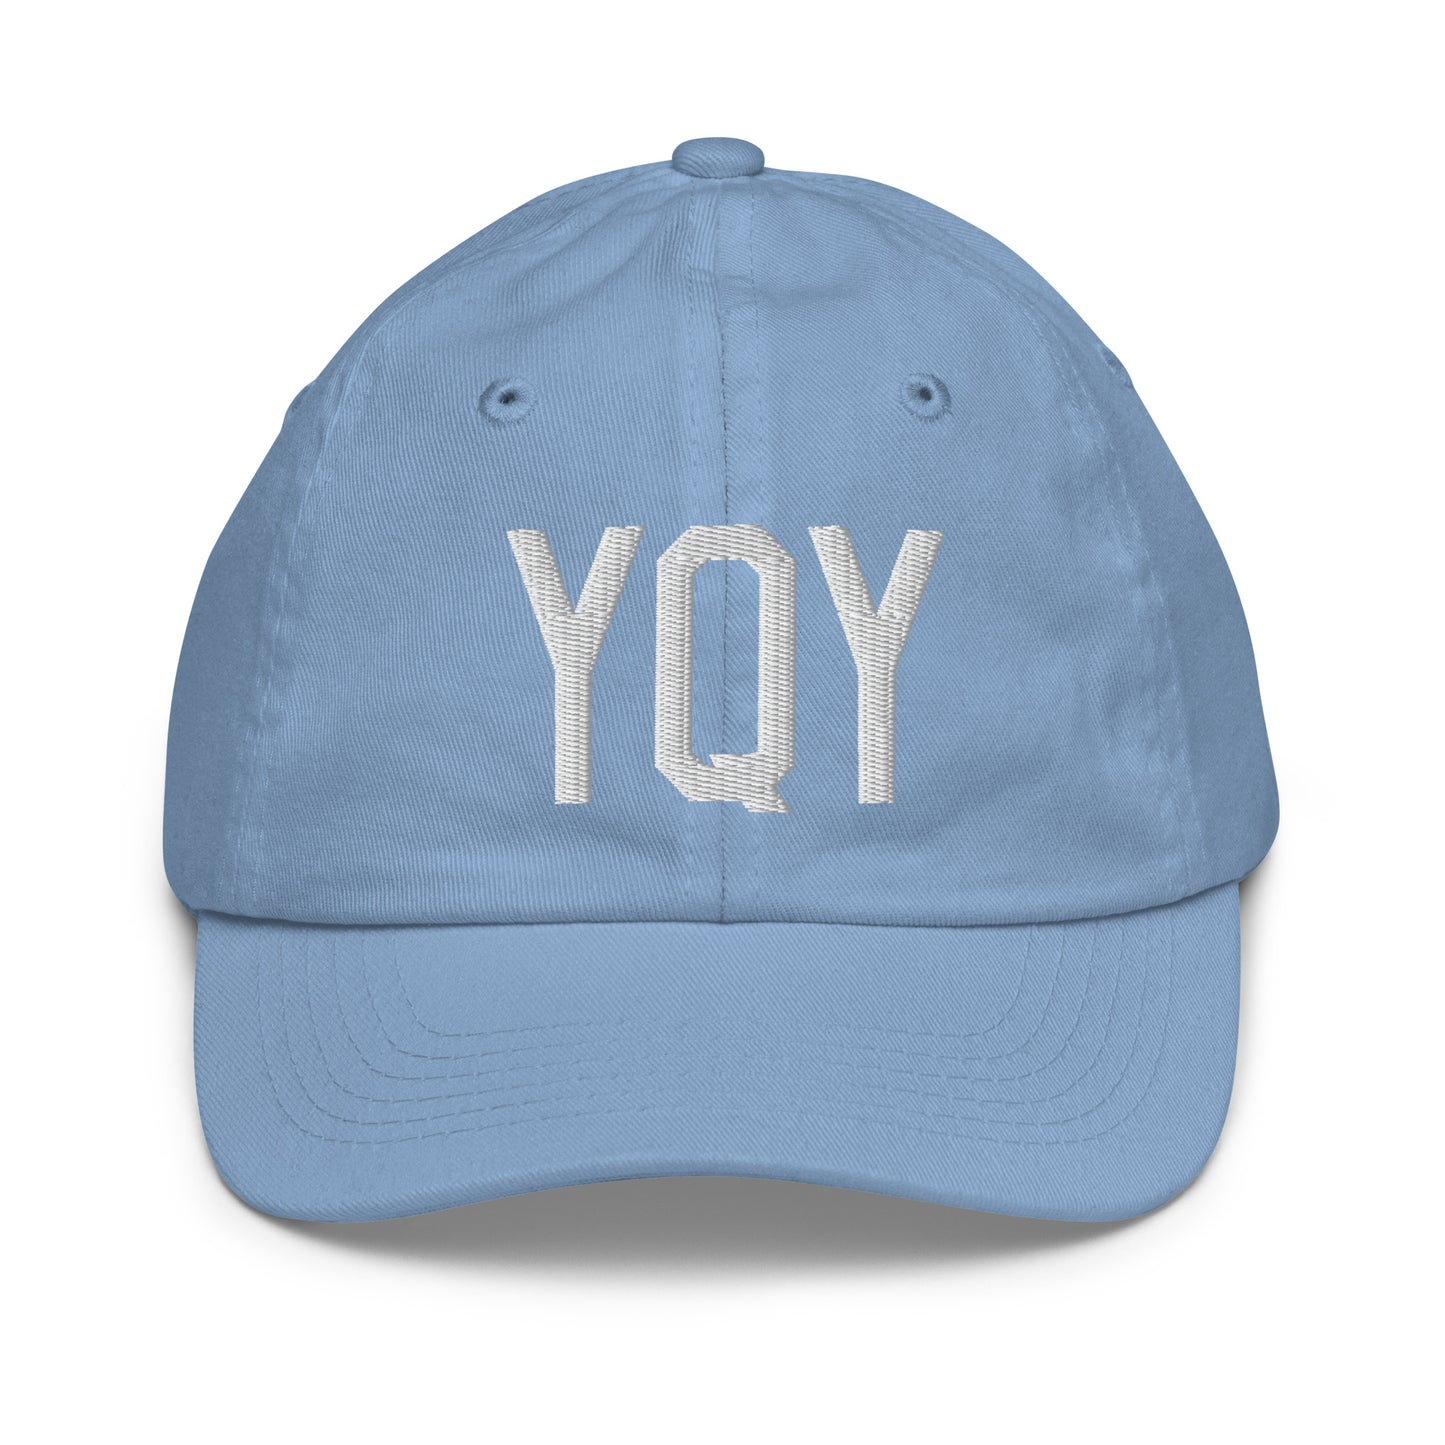 Airport Code Kid's Baseball Cap - White • YQY Sydney • YHM Designs - Image 22